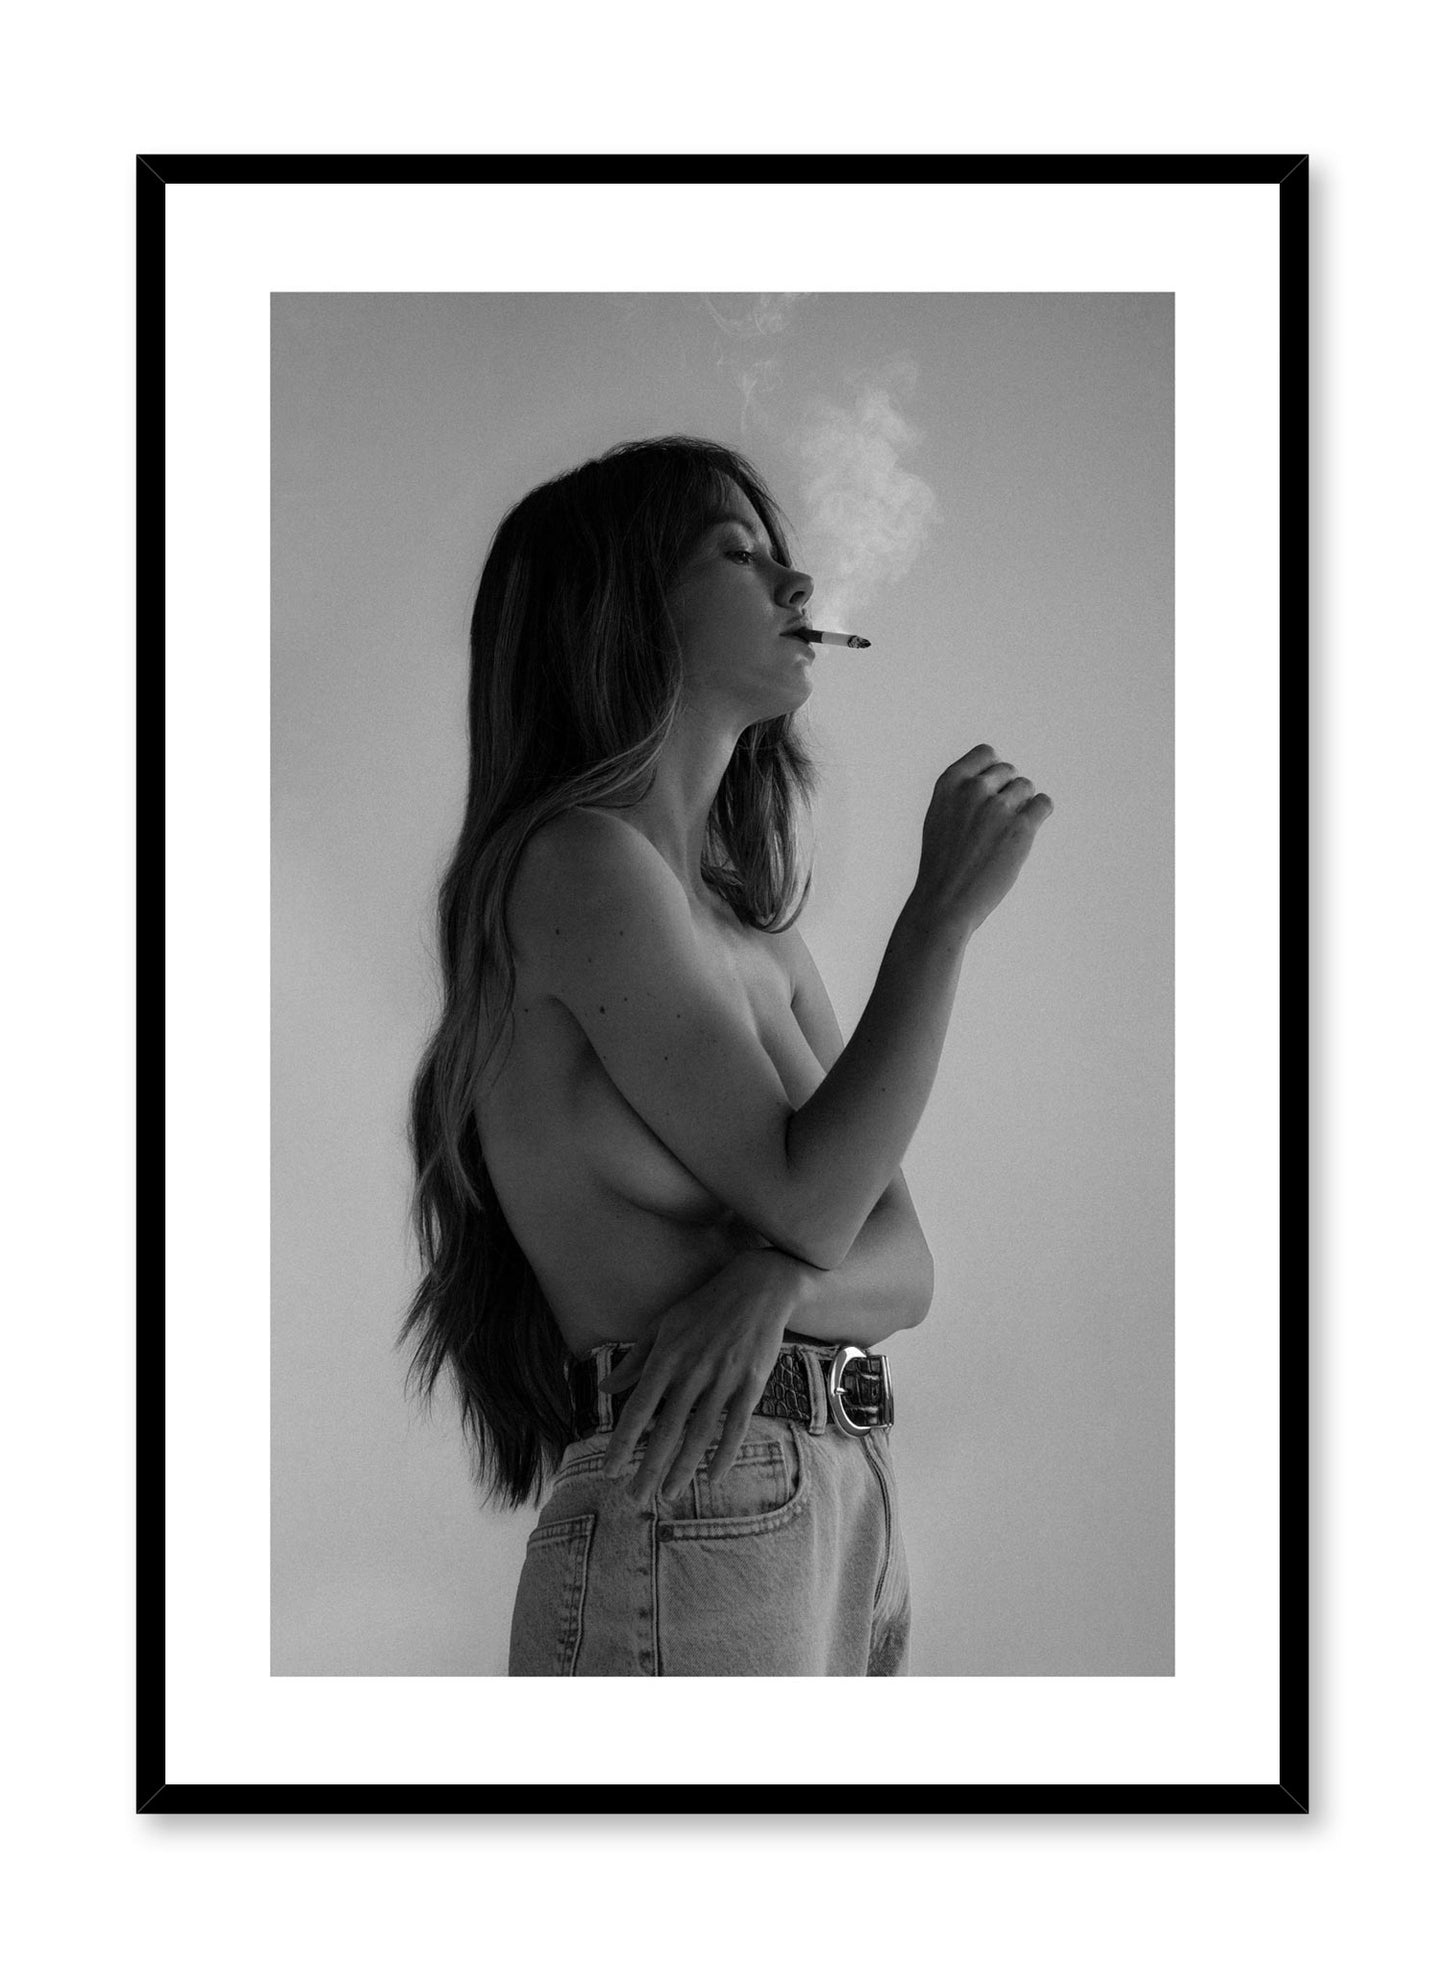 Black and white fashion photography poster by Opposite Wall with topless woman smoking cigarette